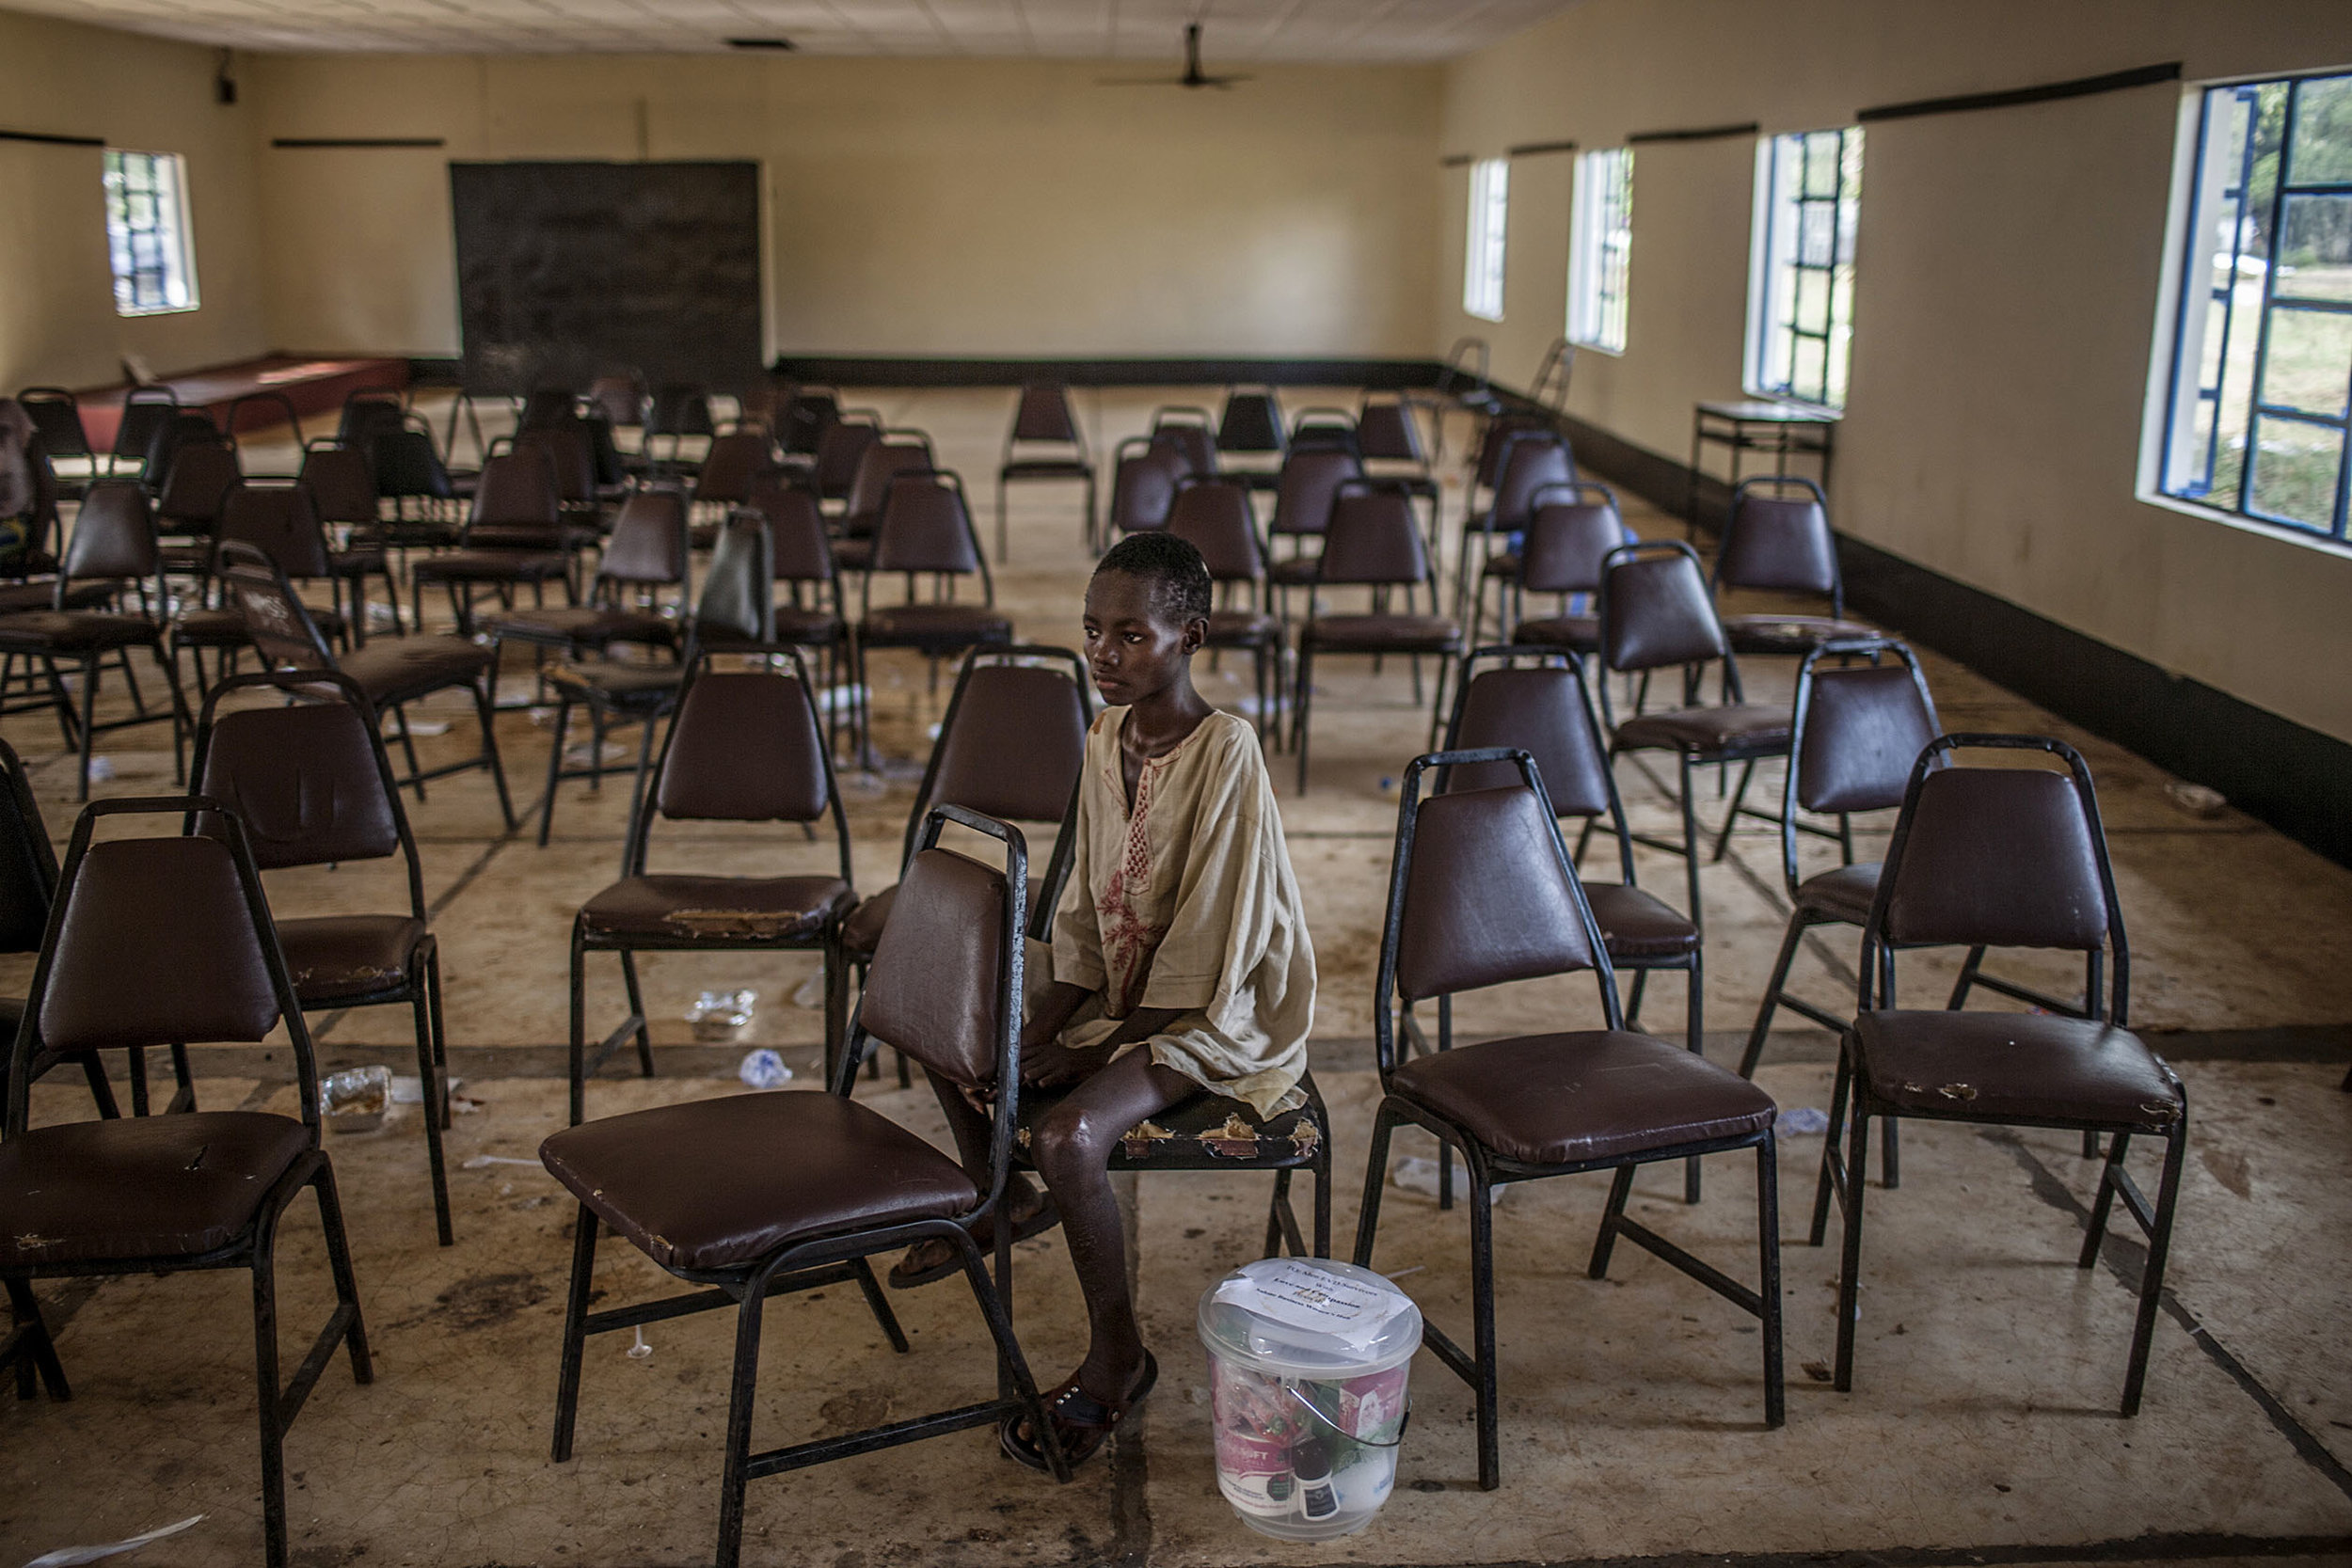  Molai Kamara, approximately 12 years old, sits alone following a discharge ceremony for Ebola survivors at the Hastings Ebola Treatment Center in Hastings, Sierra Leone on Saturday, November 29, 2014. While excitement buzzed outside as the other 55 